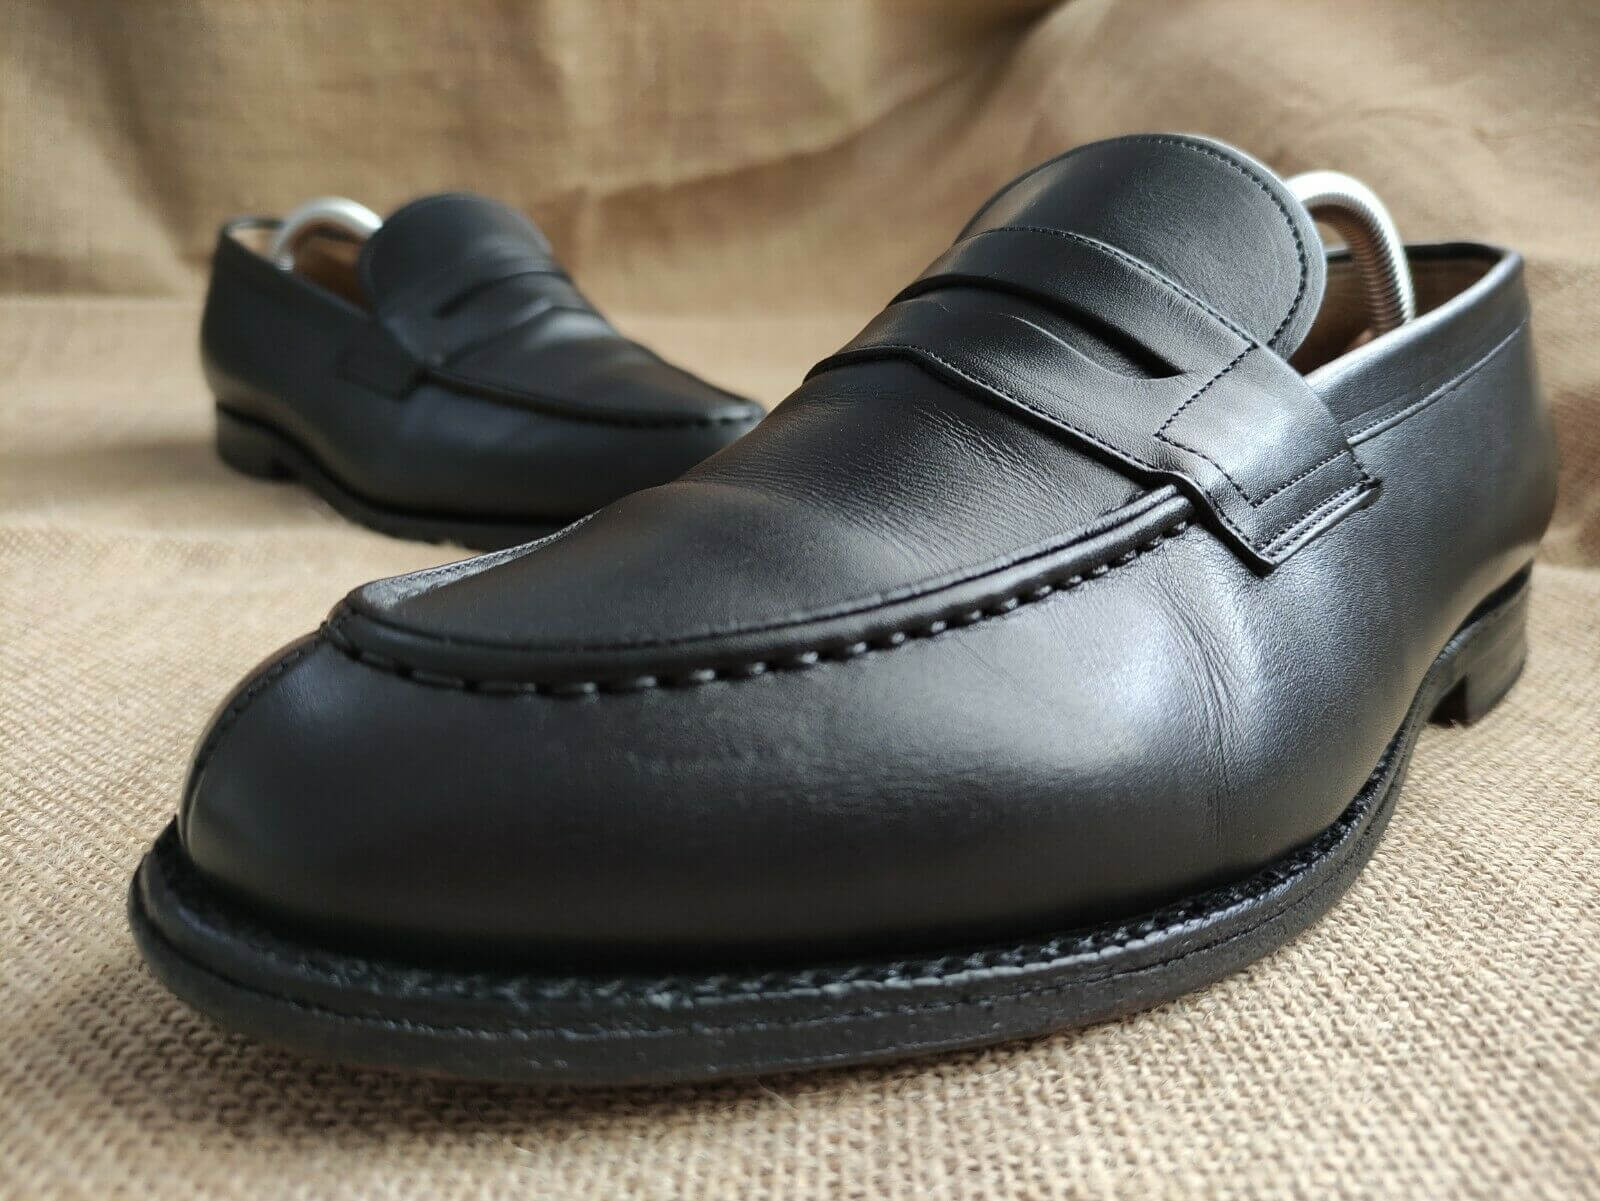 Church's Darwin Men's Black Leather Penny Loafers Shoes Sz UK 9.5 G ...